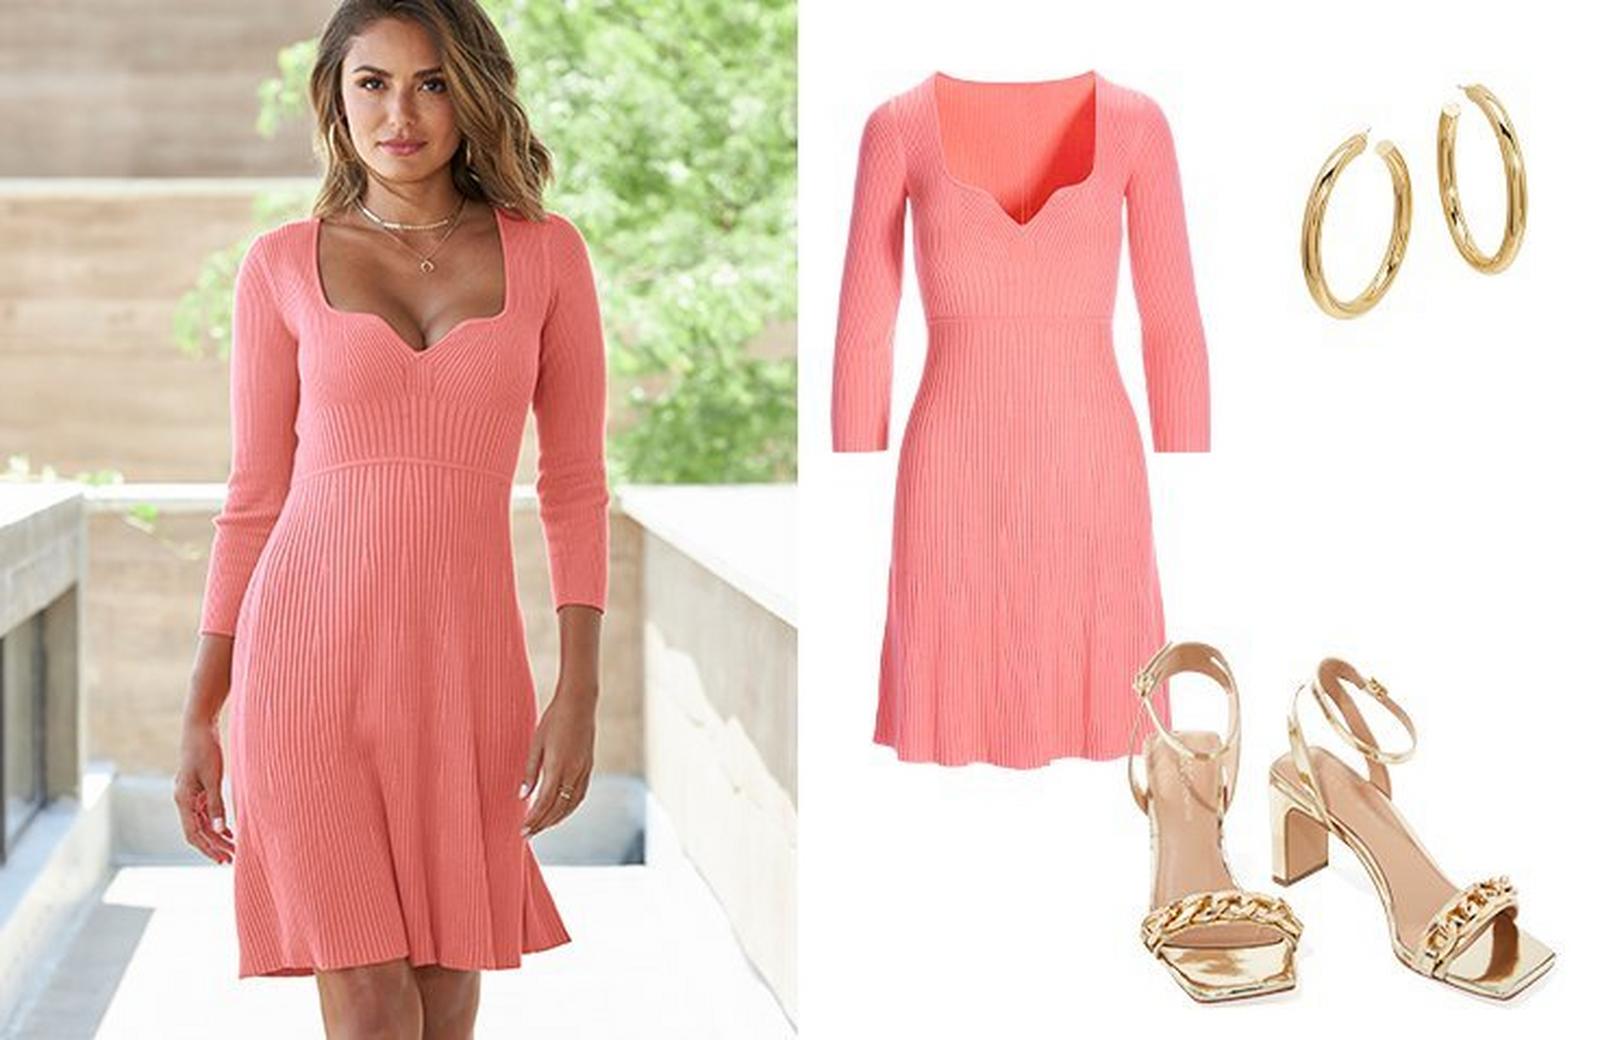 left model wearing a pink ribbed three-quarter sleeve fit-and-flare dress. right panel: pink ribbed fit-and-flare dress, gold hoop earrings, and gold chain heels.